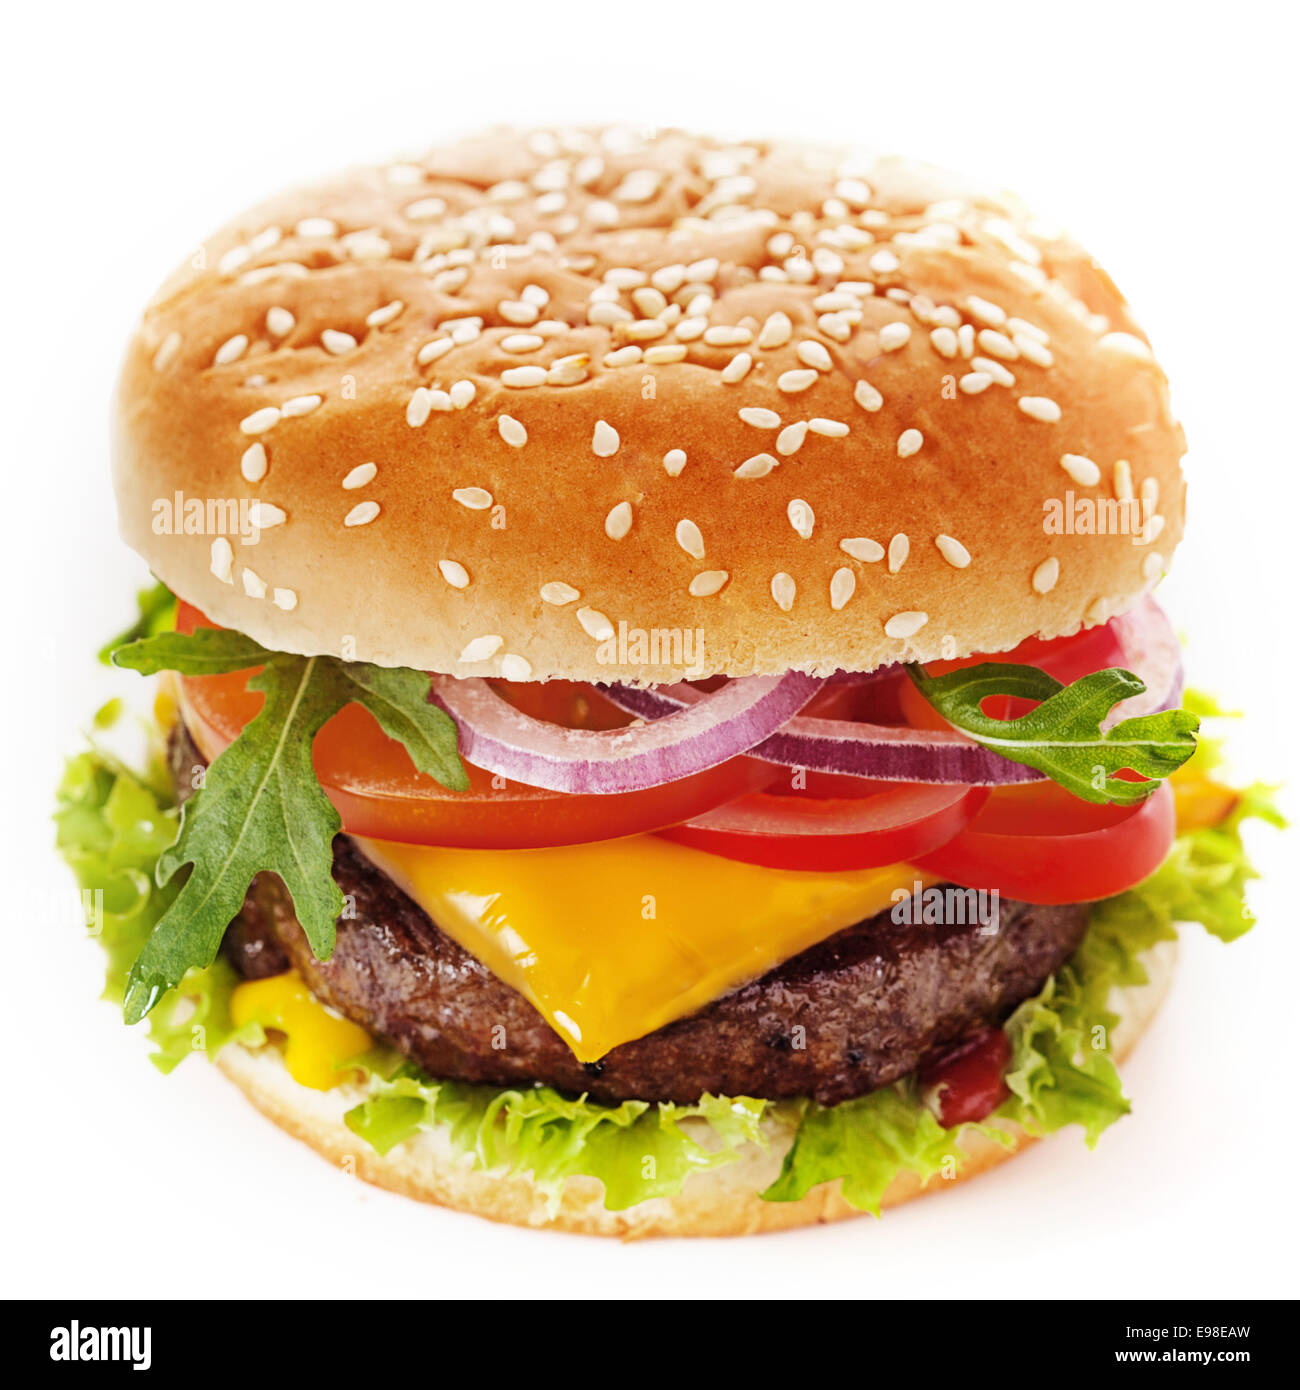 Close-up of a tasty cheeseburger made of green salad and ground meat patty topped with sliced tomato, onion, cheese, parsley and sweet ketchup, placed inside a sliced hamburger bun with sesame Stock Photo